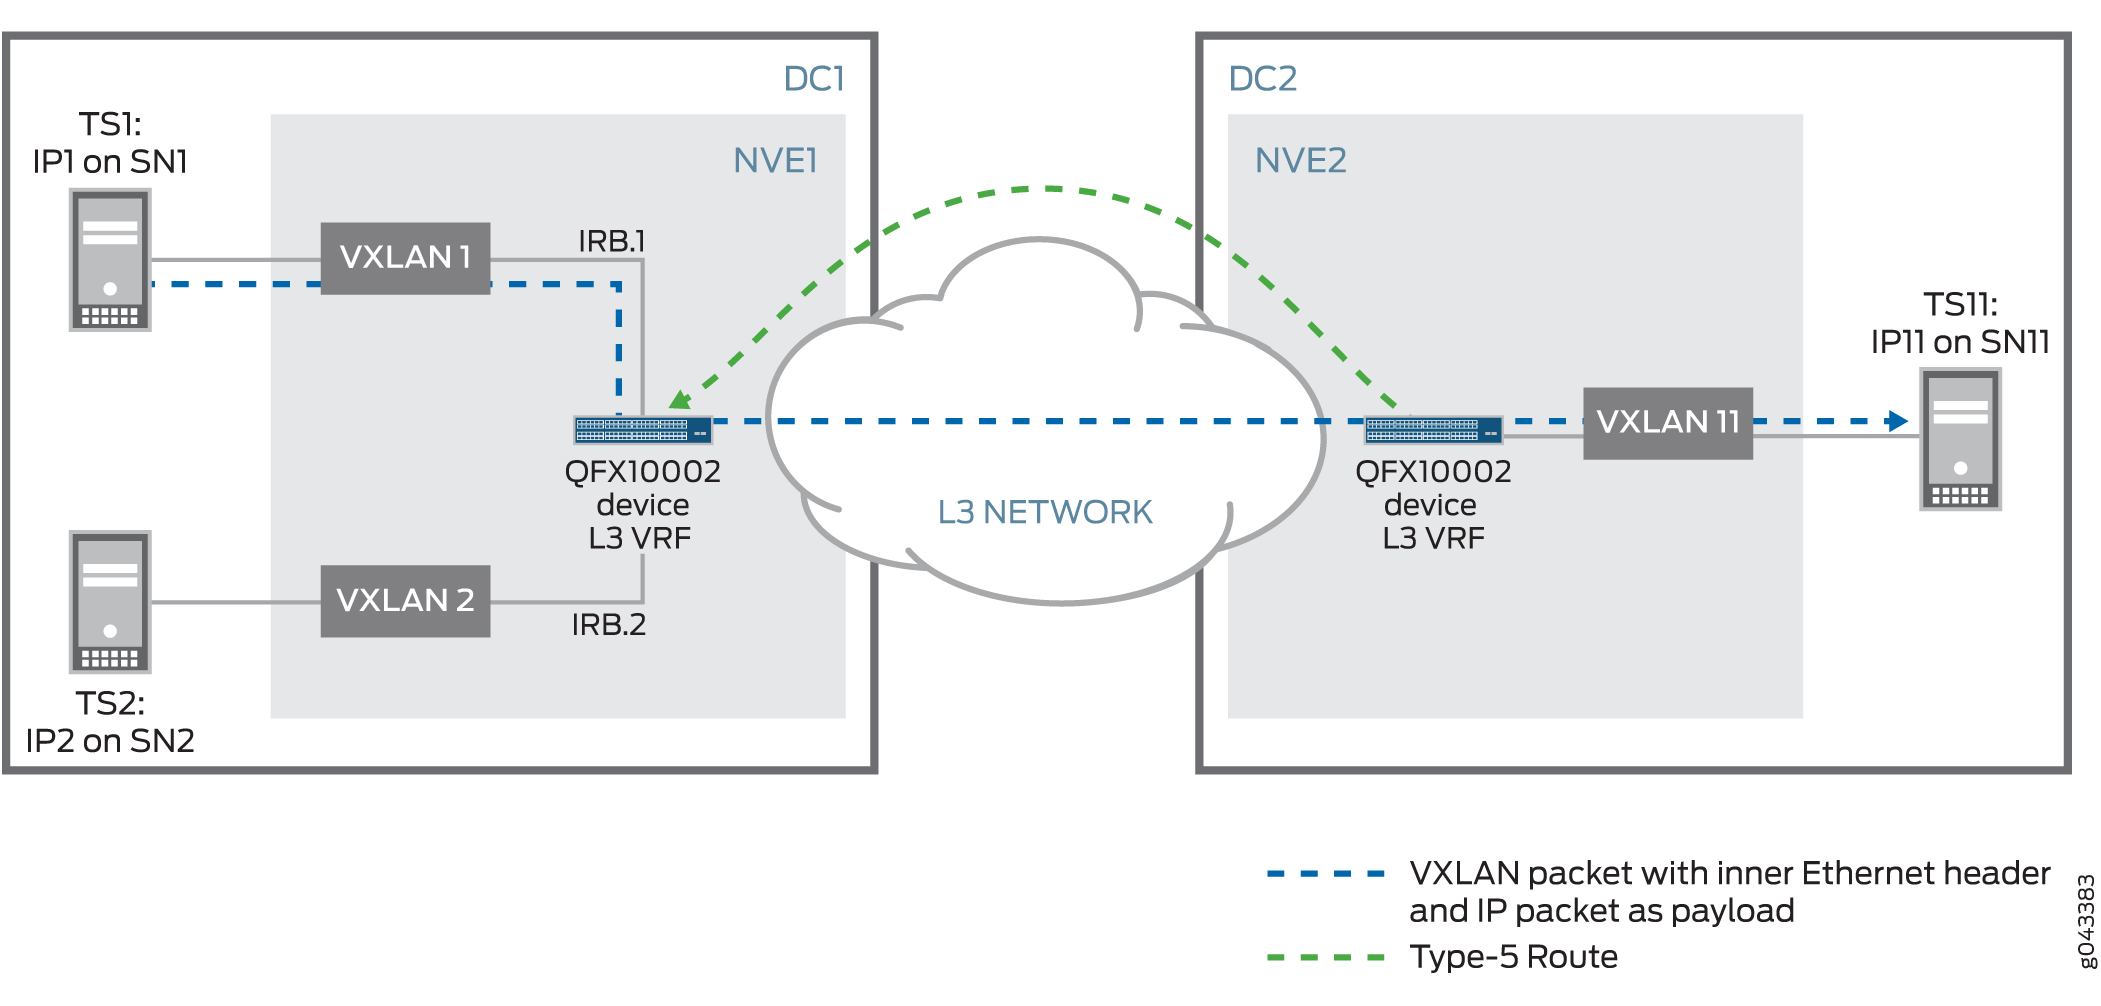 EVPN-VXLAN Connection with Pure Type 5 Route Between Two Data Centers